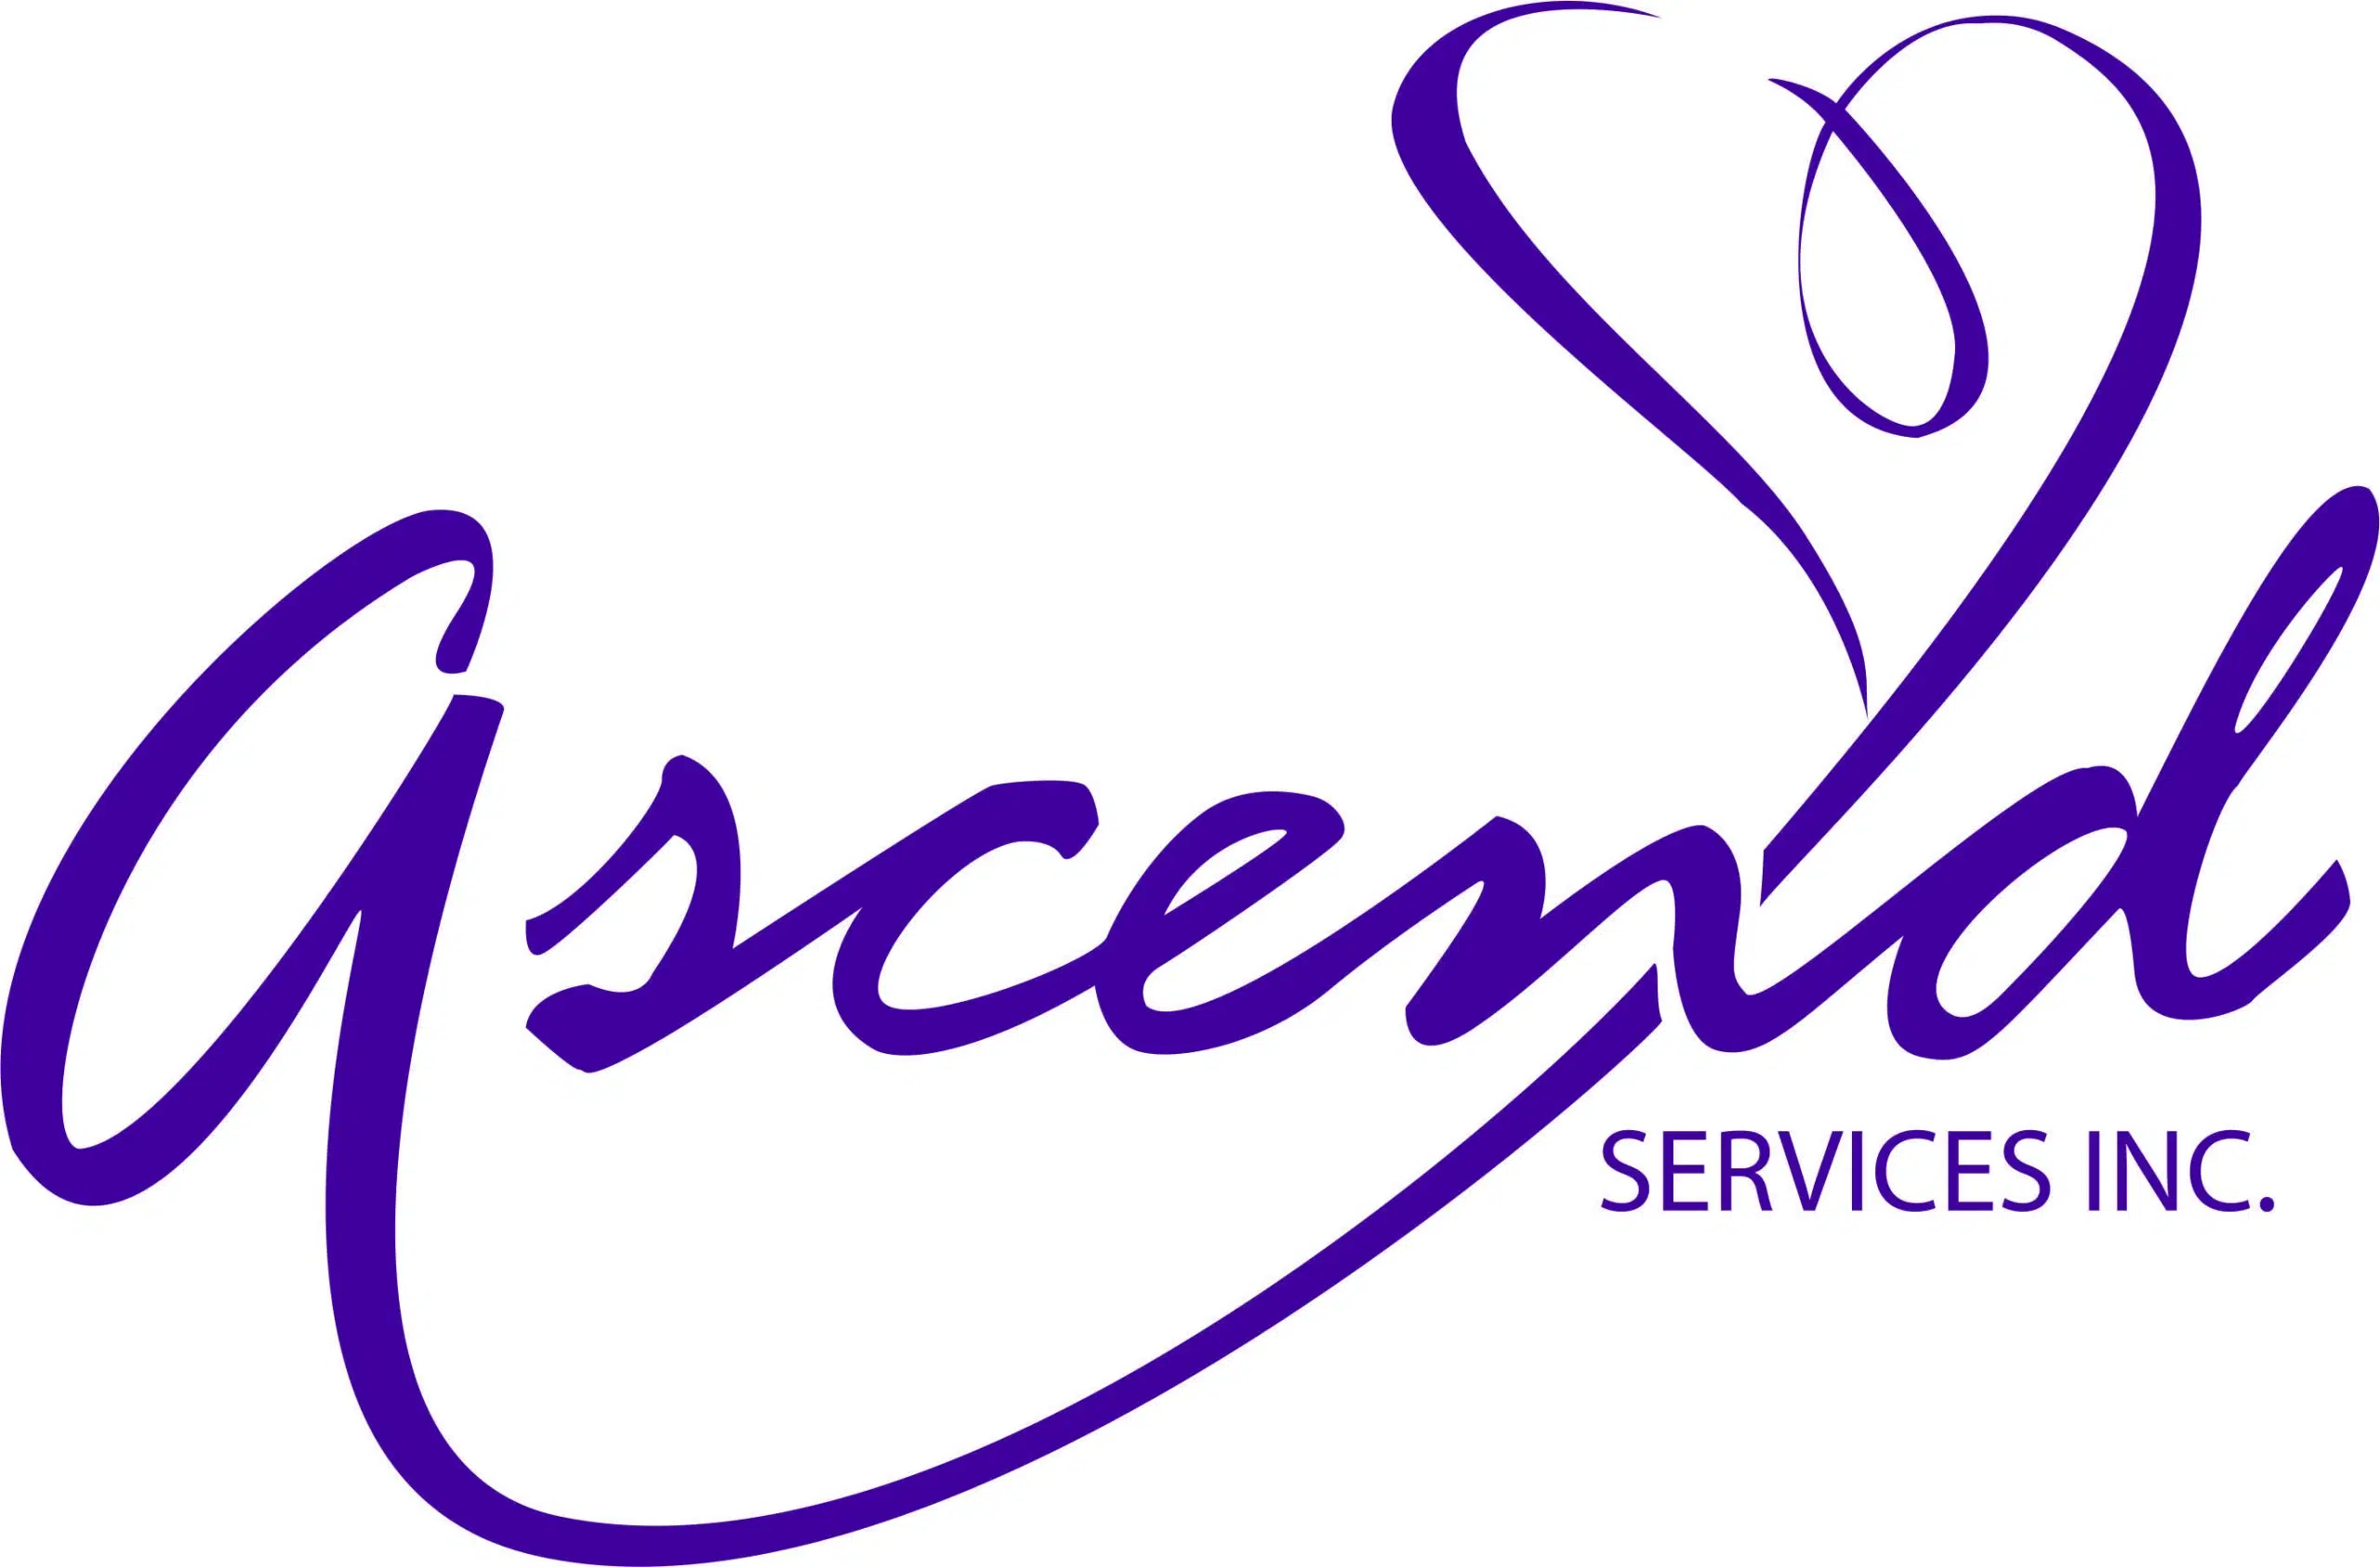 Ascend Services to Host a Respite Care Job Fair This Friday